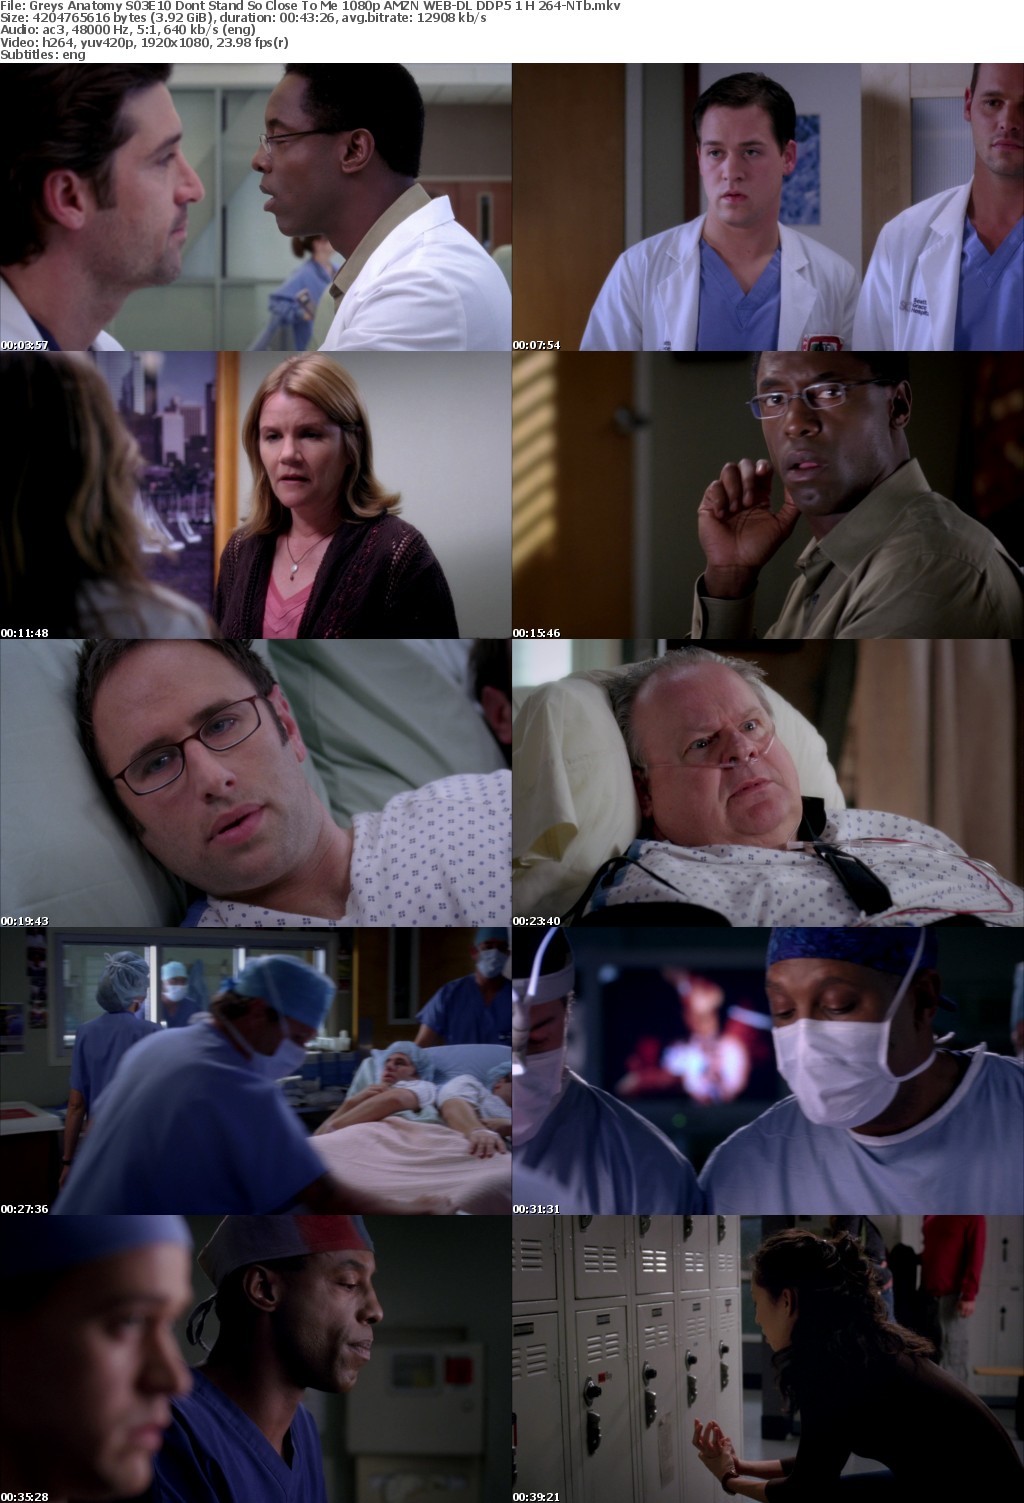 Greys Anatomy S03E10 Dont Stand So Close To Me 1080p AMZN WEB-DL DDP5 1 H 264-NTb